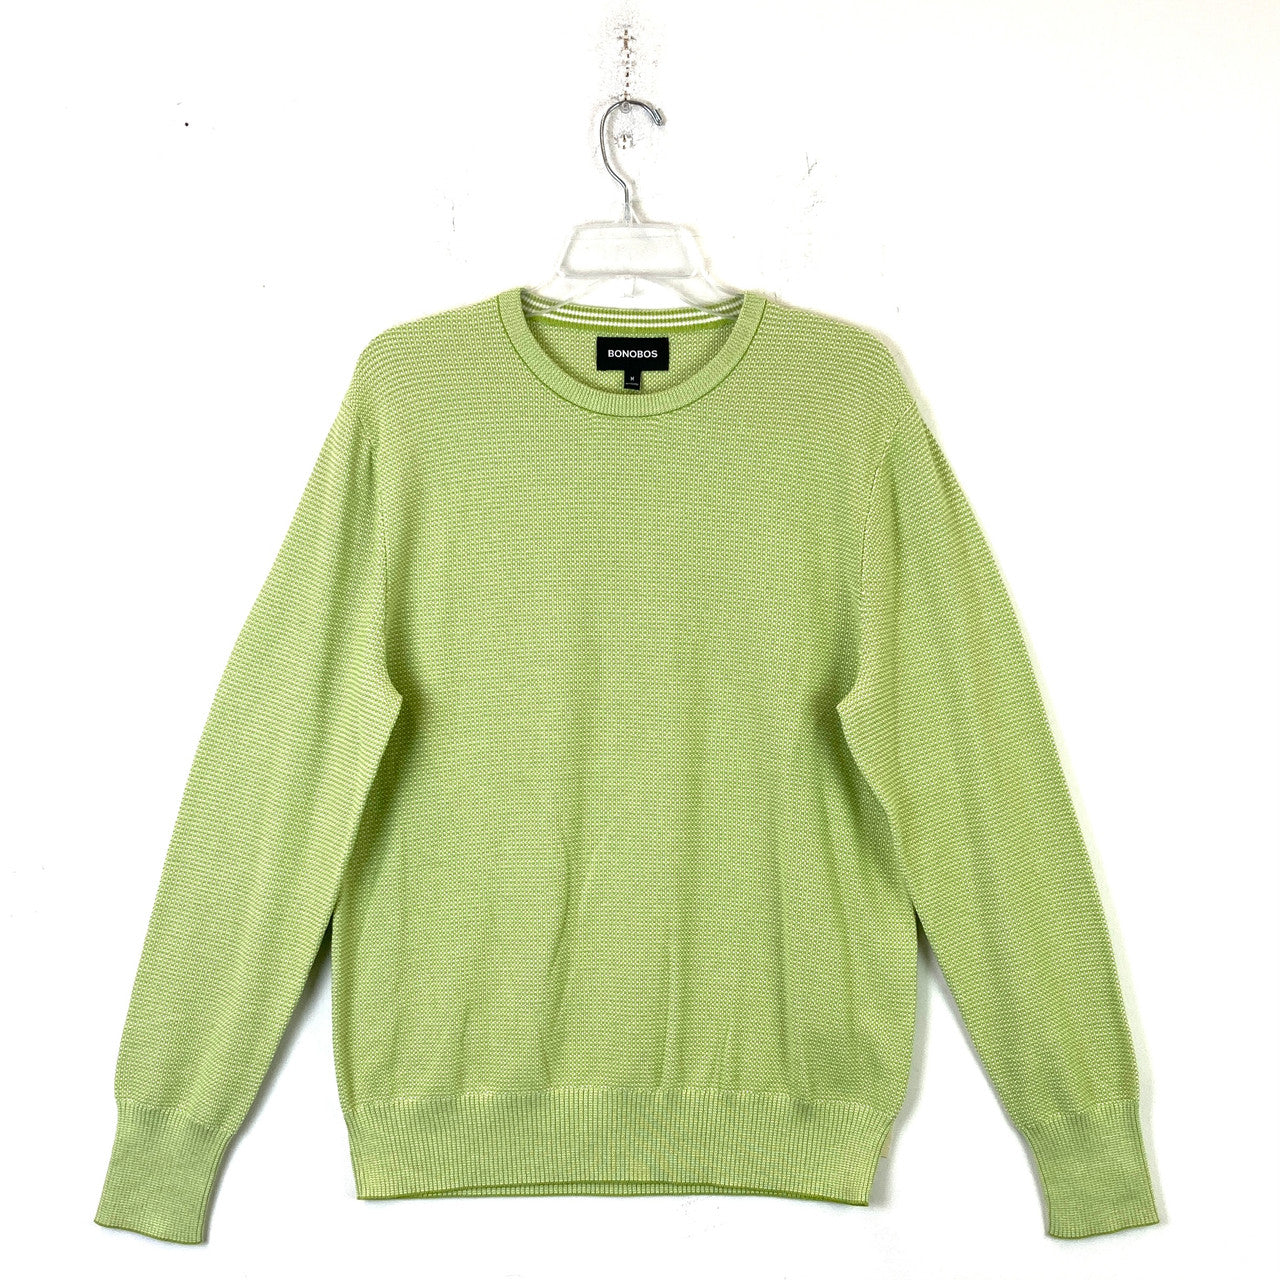 Bonobos Lime and White Patterned Sweater-Thumbnail